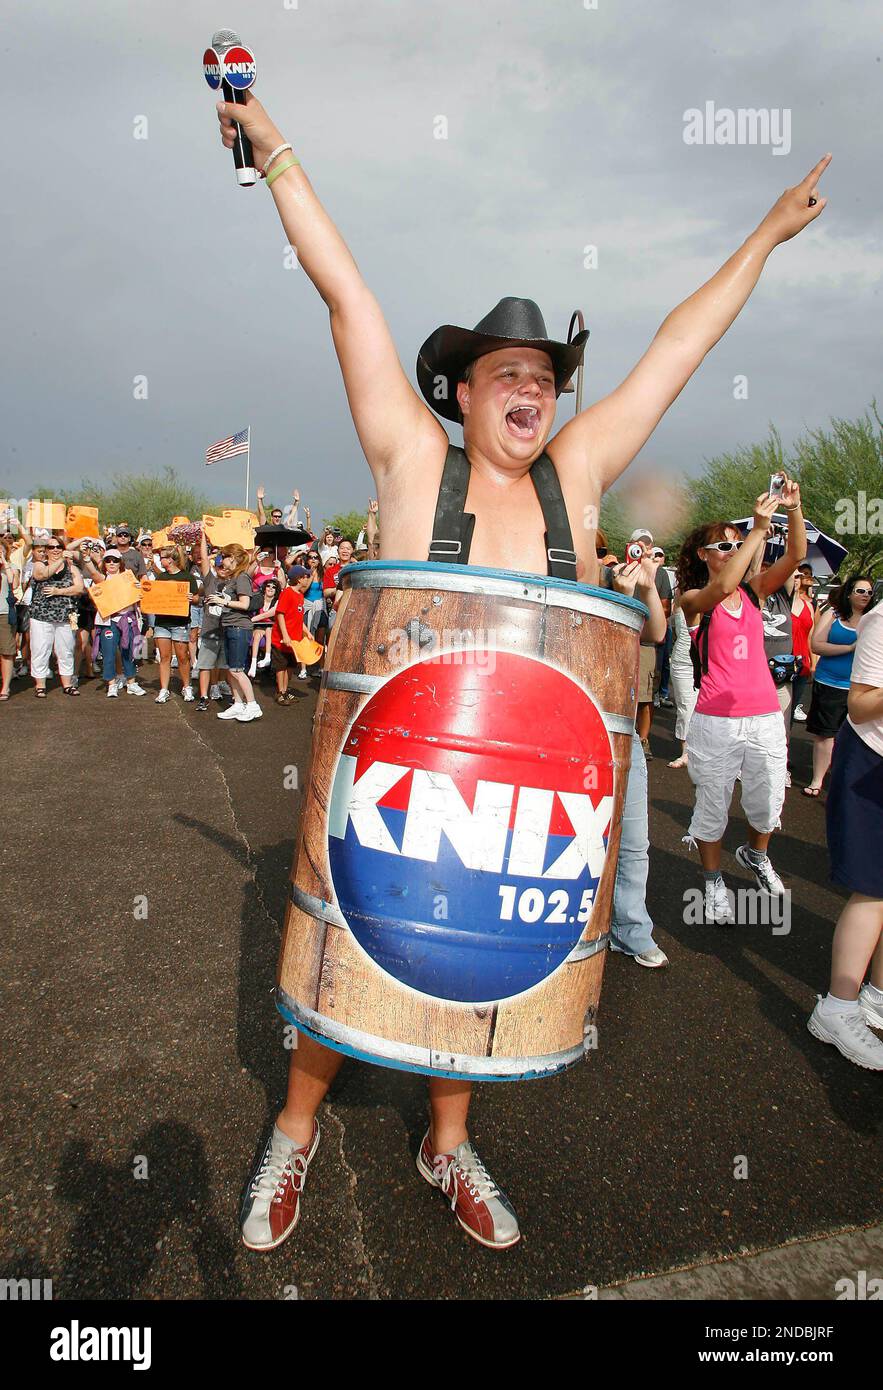 KNIX FM 102.5 radio personality Barrel Boy and a large crowd cheer